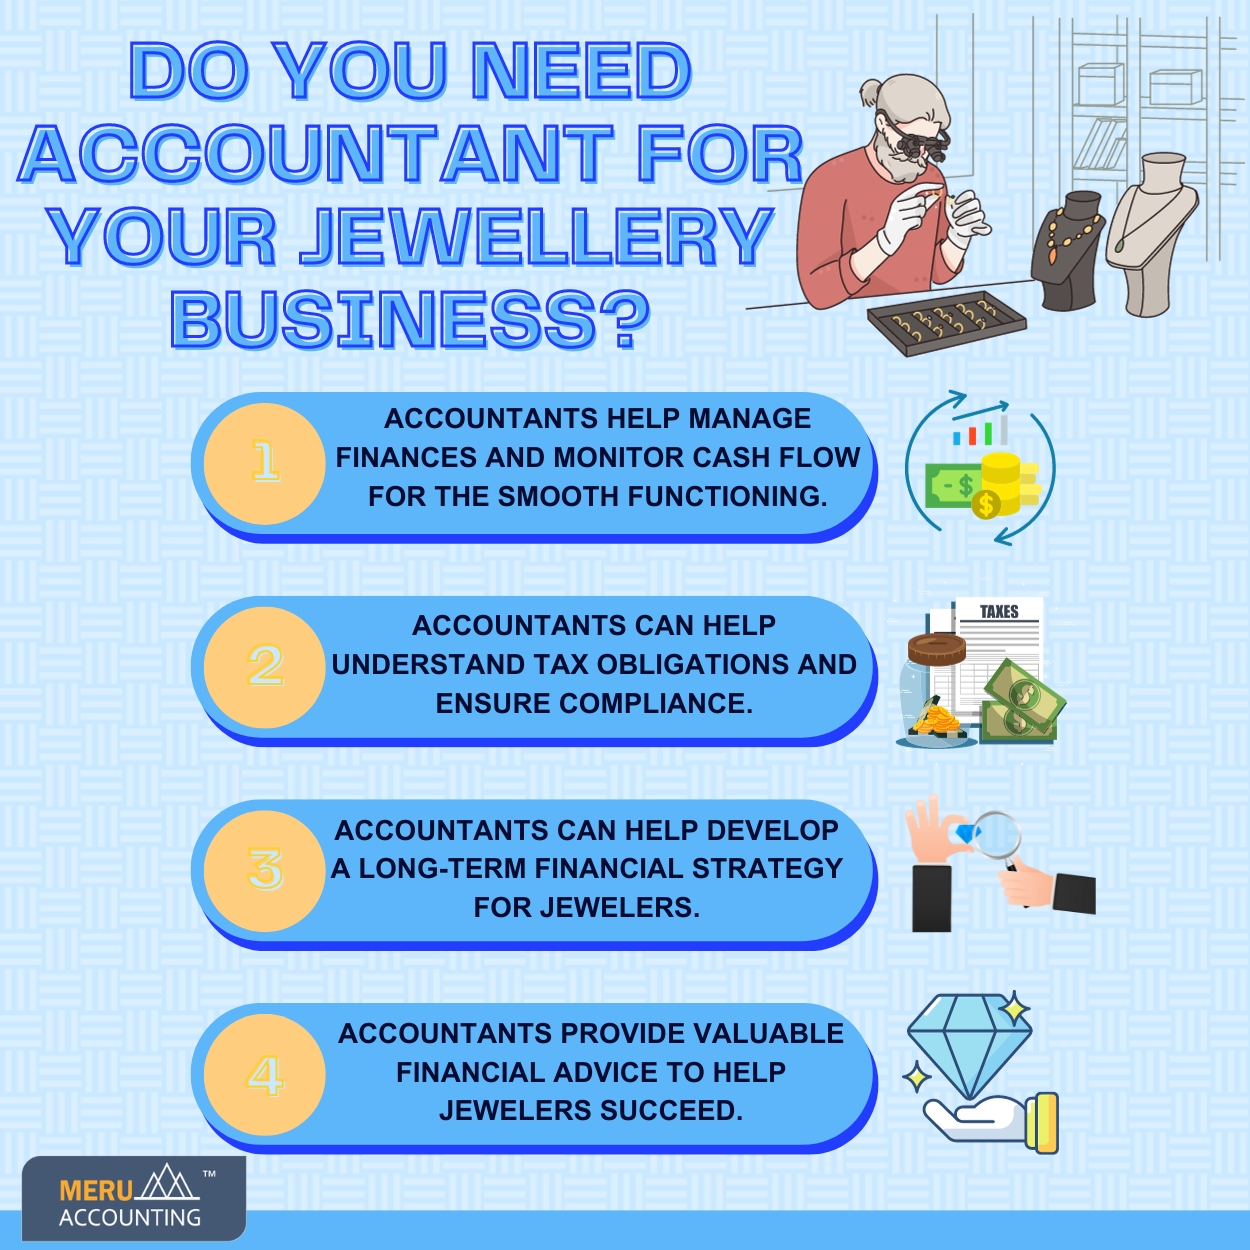 Pansy Do You Need Accountant For your Jewellery Business sr no.85 size 1250 by 1250 v1